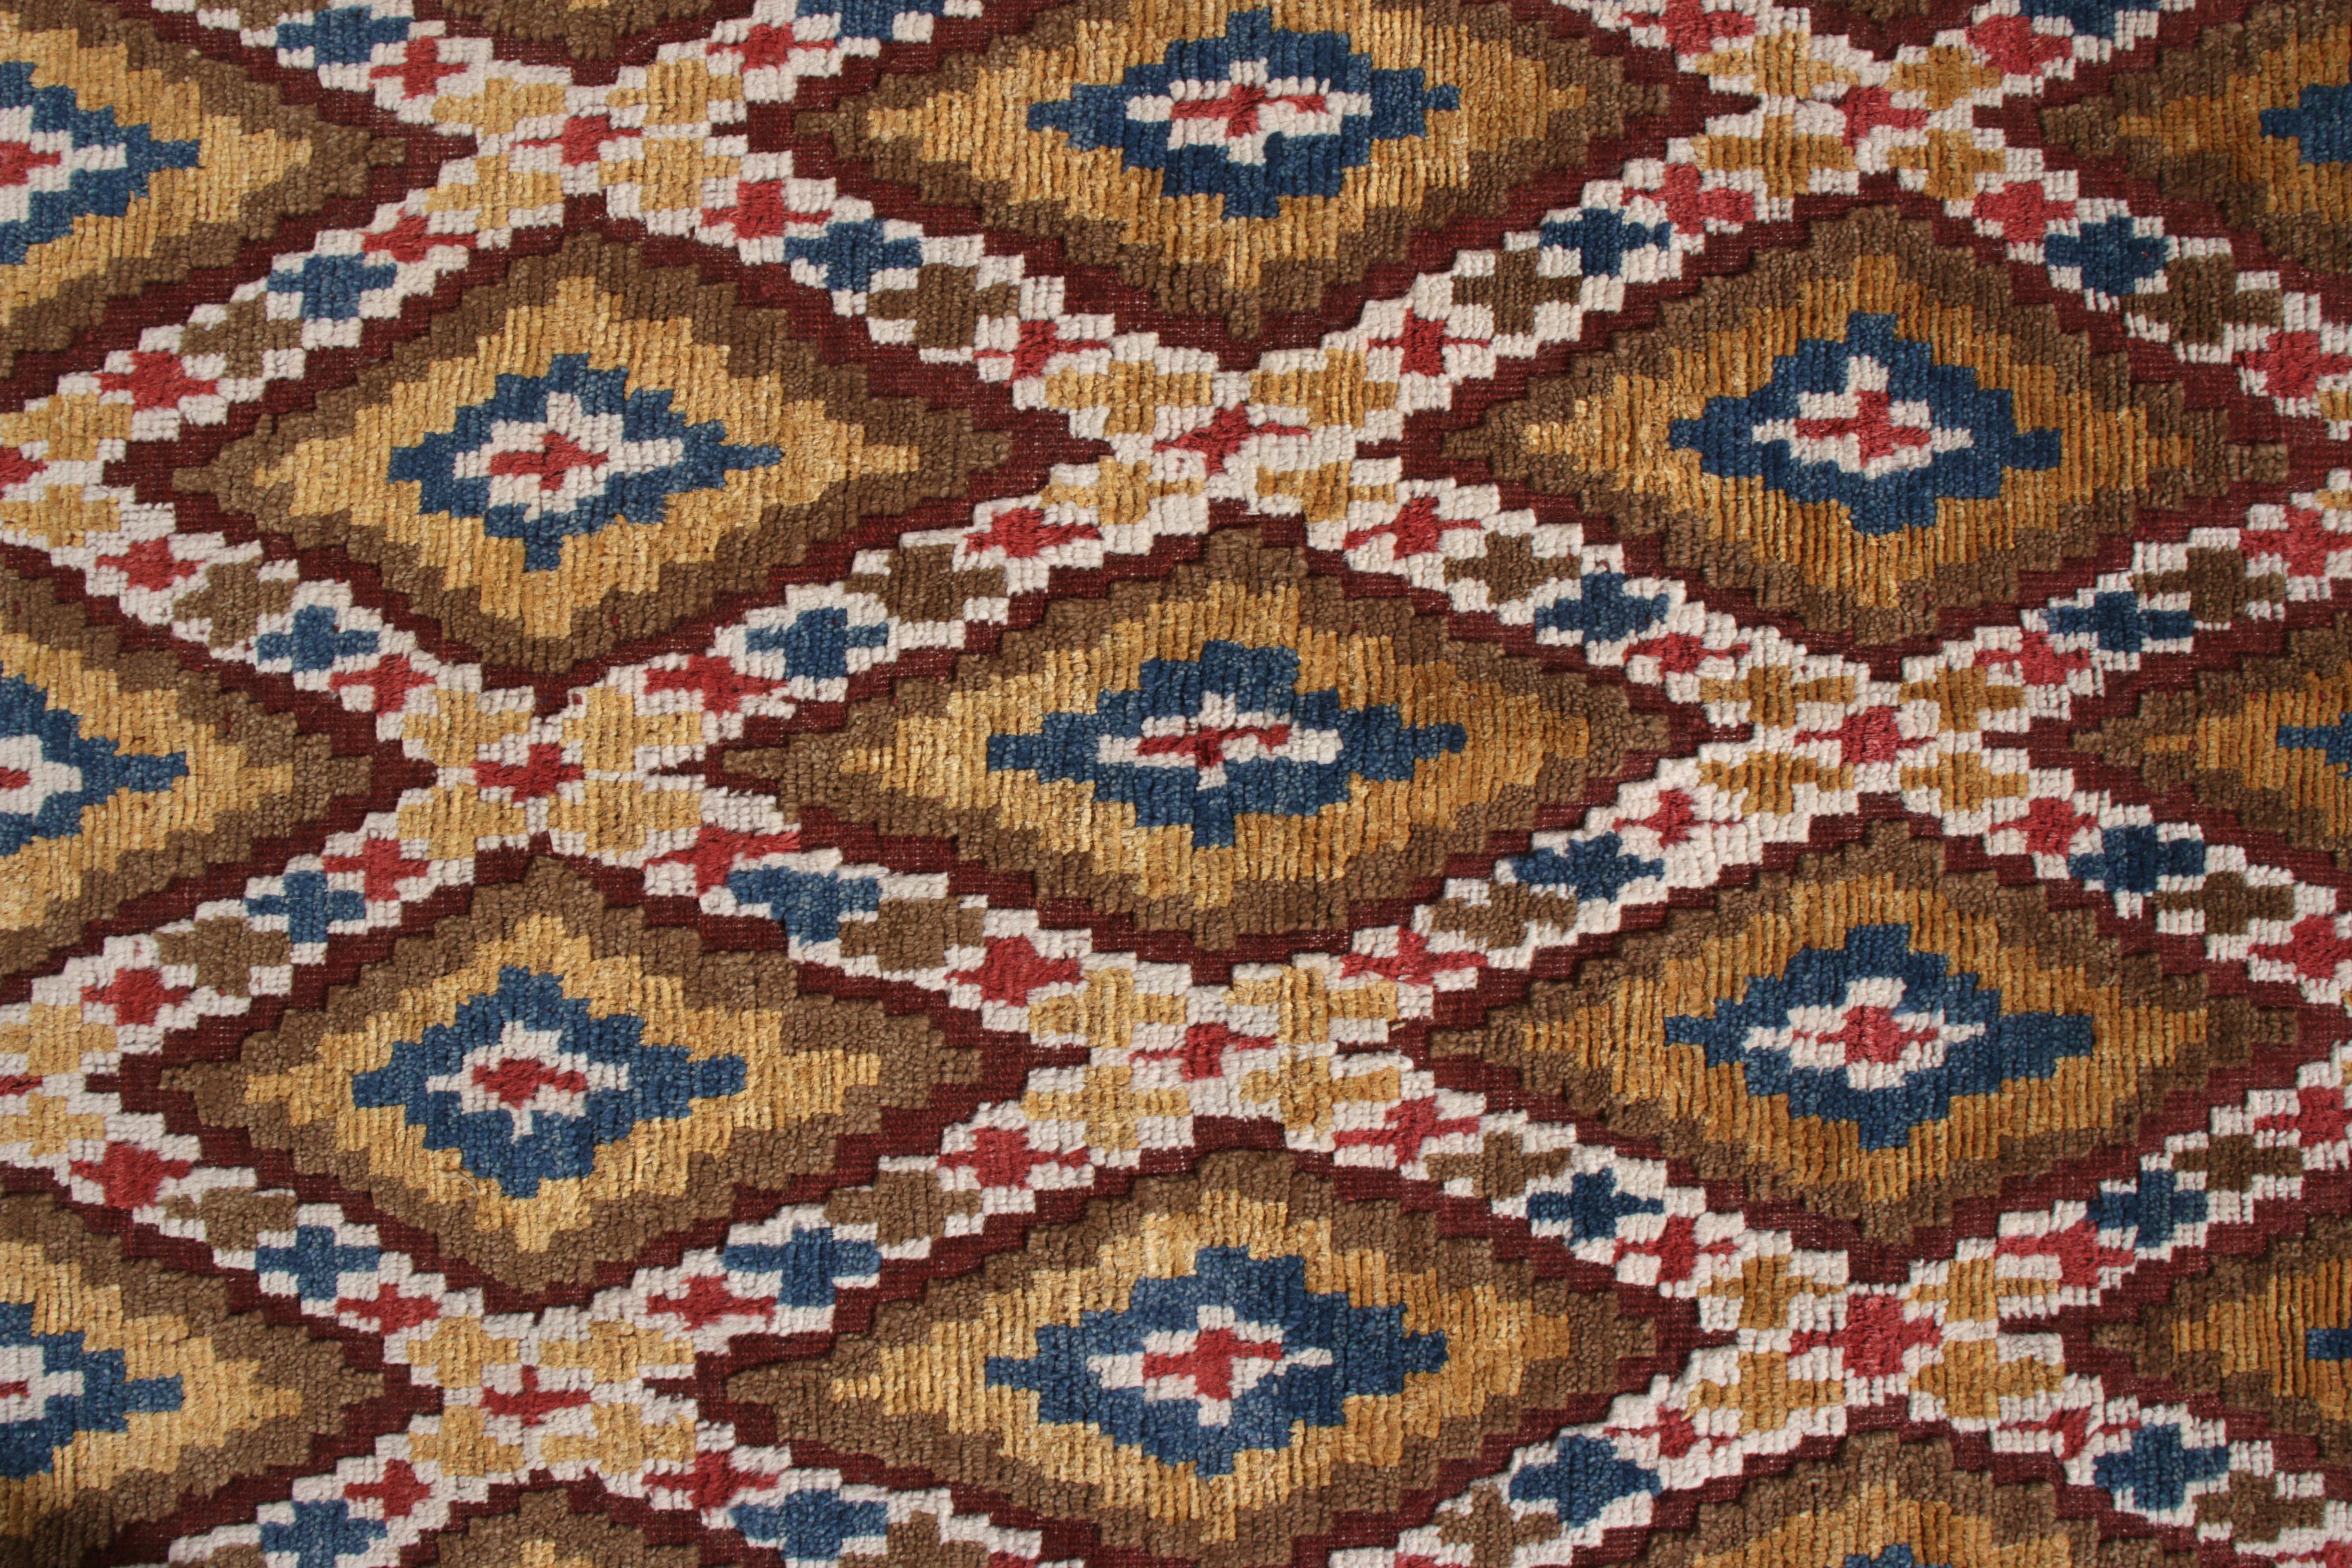 Indian Rug & Kilim’s Moroccan Style Rug in Beige-Brown All over Diamond Pattern For Sale